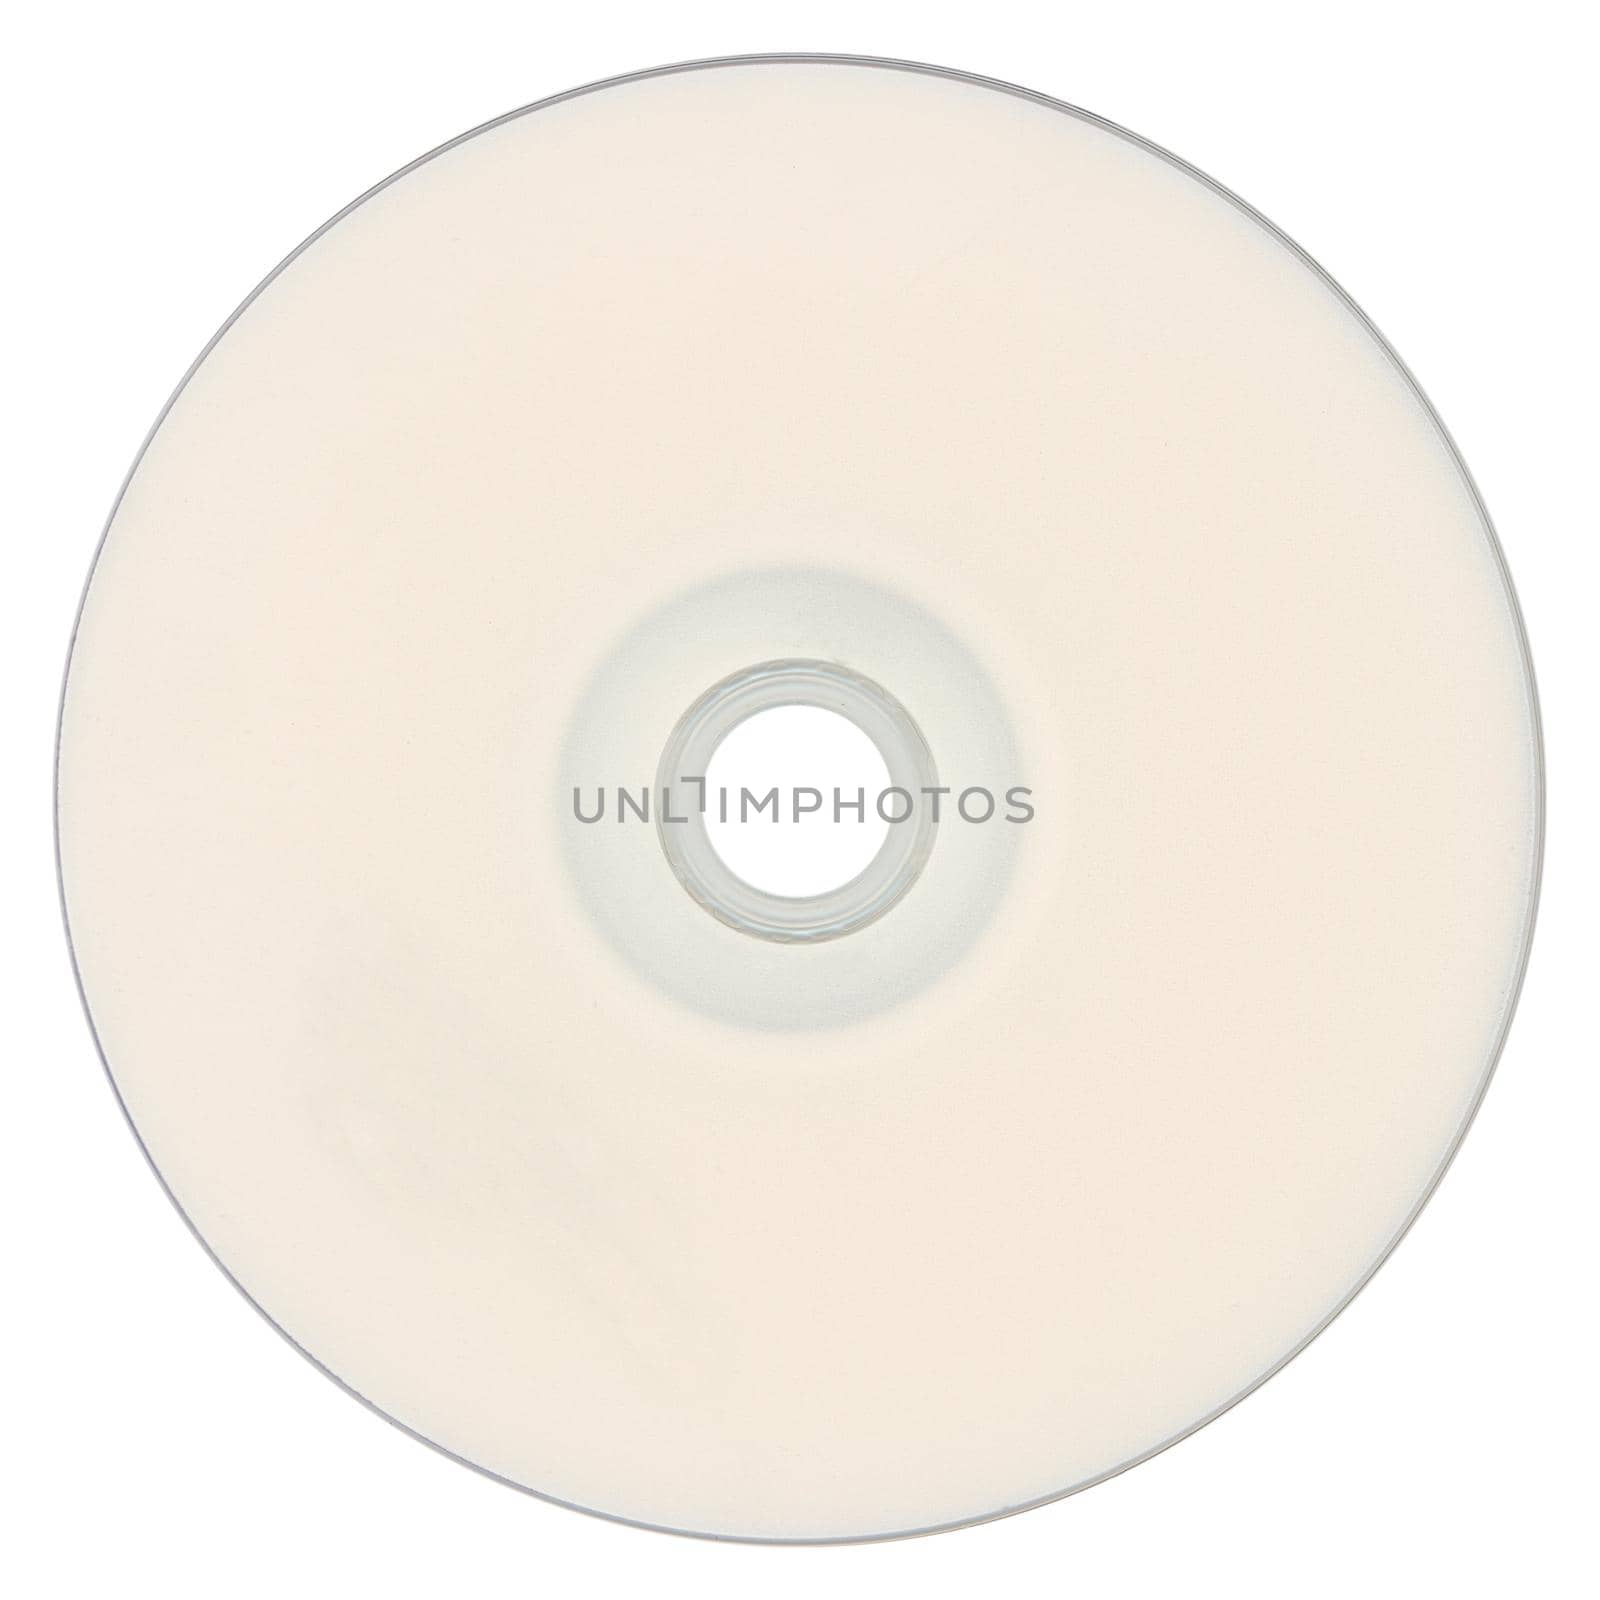 CD (compact disc) for music and data recording isolated over white background